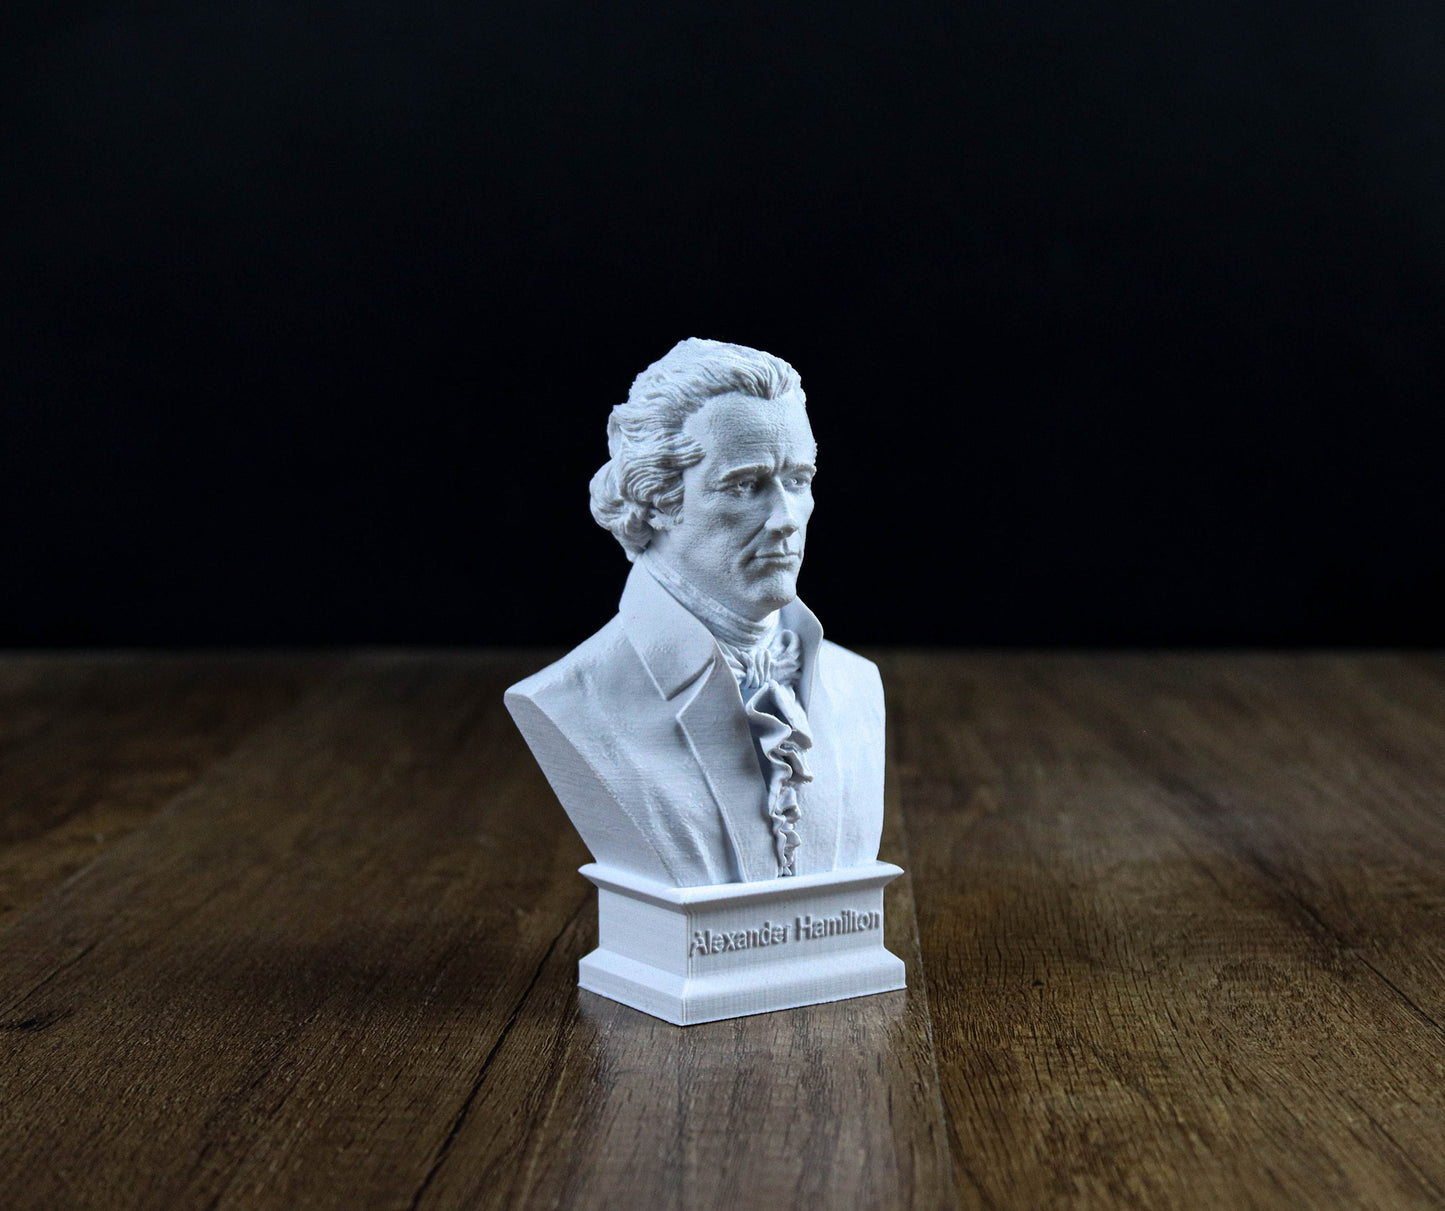 Alexander Hamilton Bust, Founding Father of the United States Sculpture